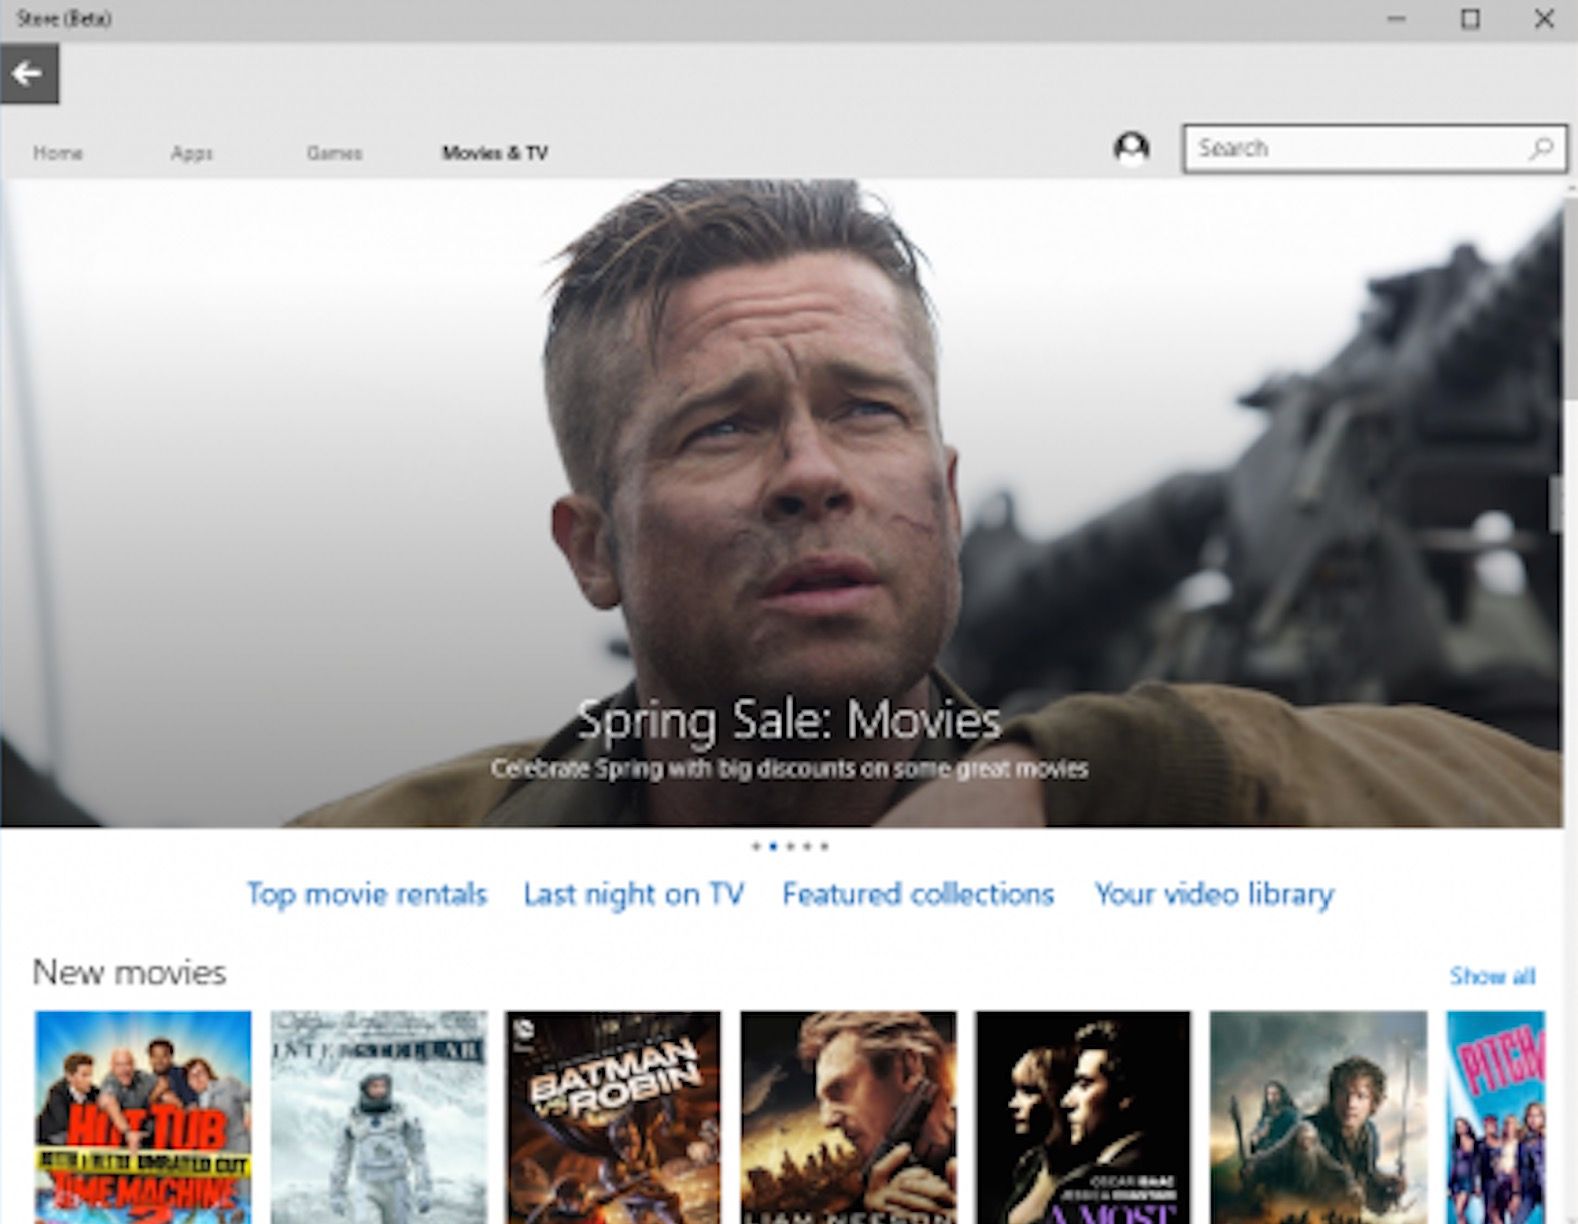 microsoft starts laying the groundwork for unified store experience in windows 10 image 1